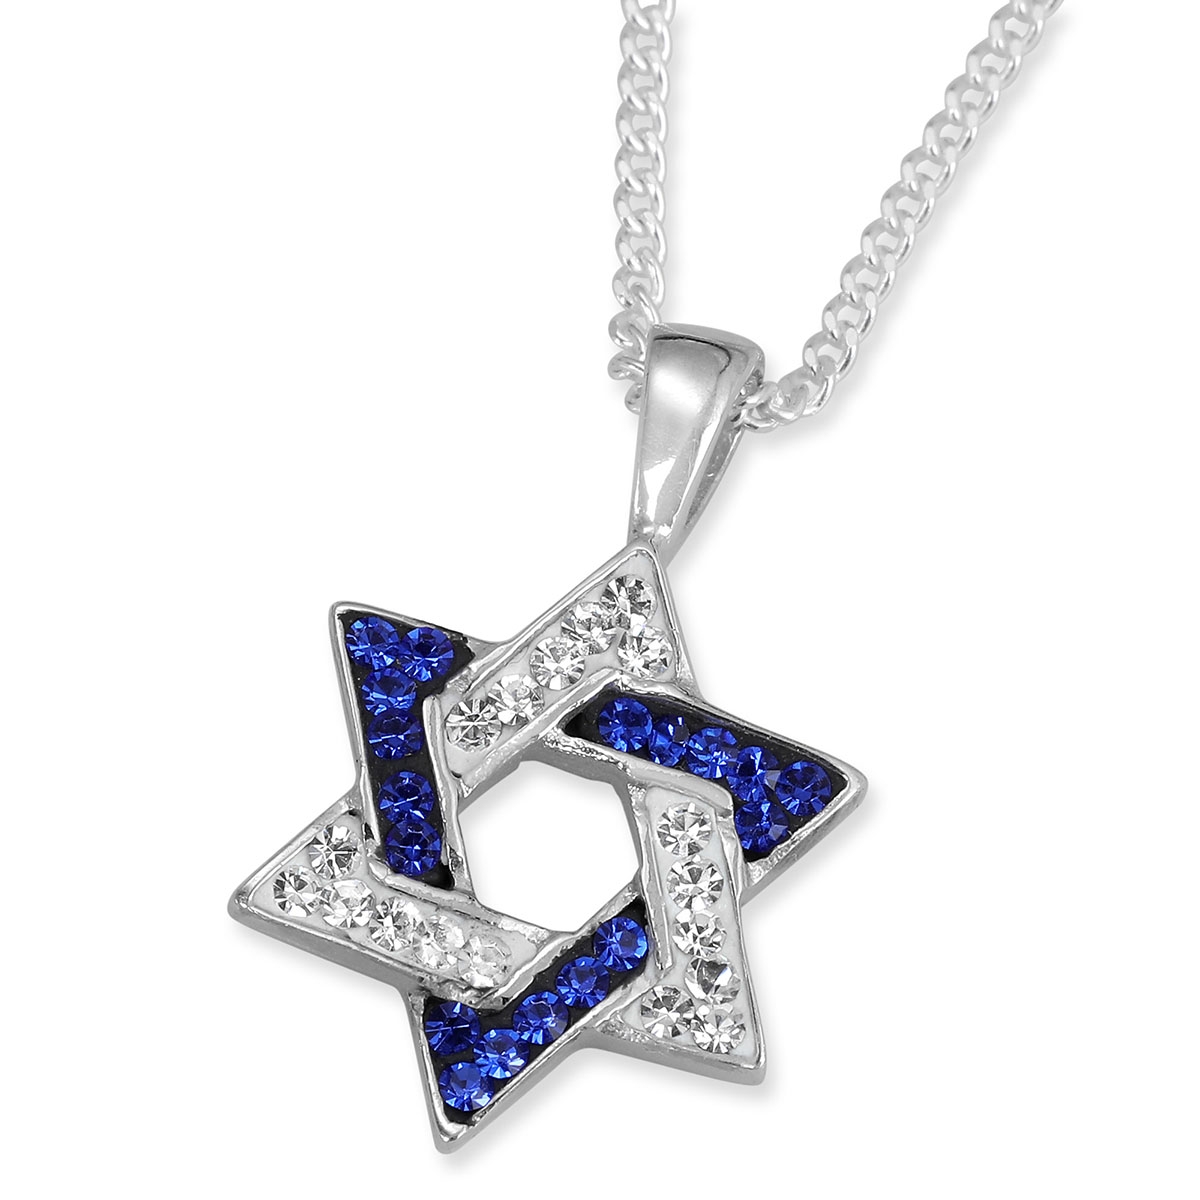 Zircon Stone-Encrusted 925 Sterling Silver Star of David Pendant Necklace - 1